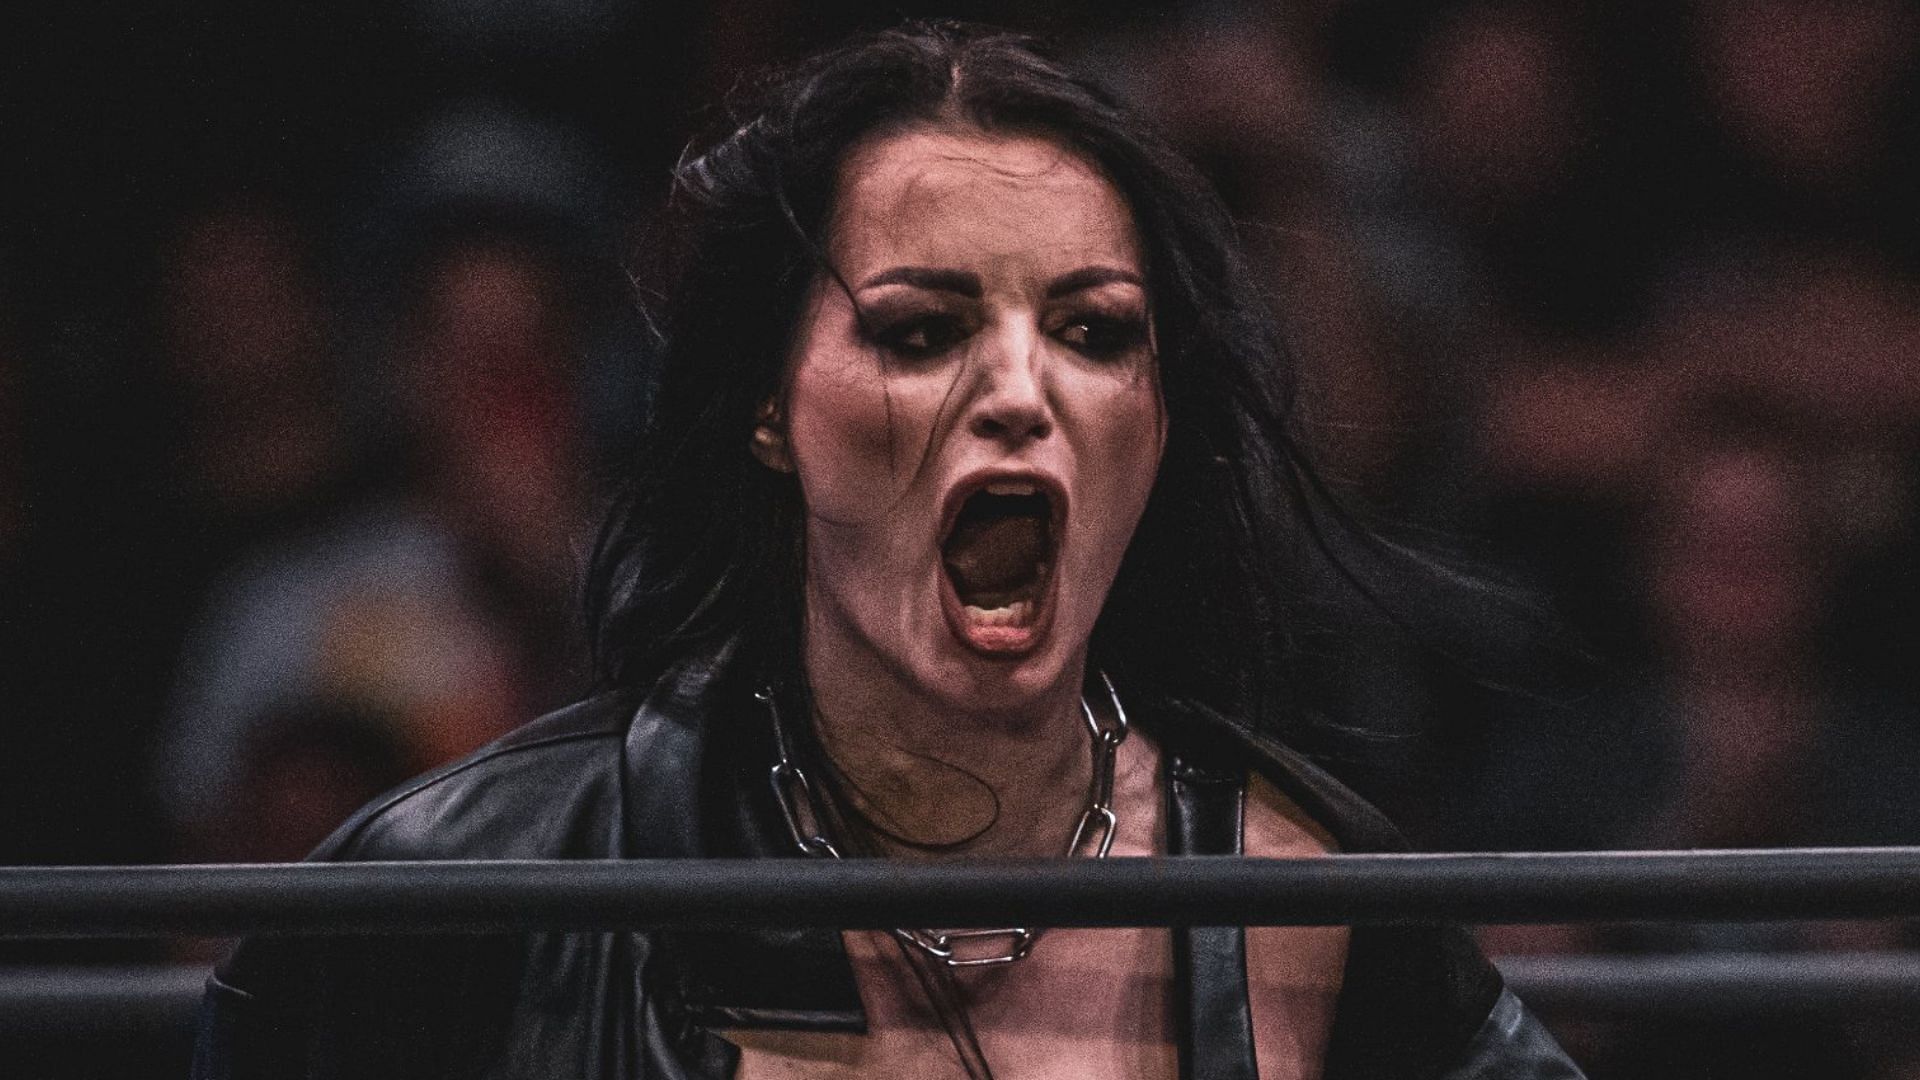 Saraya at an AEW Dynamite event in 2022 (credit: Jay Lee Photography)